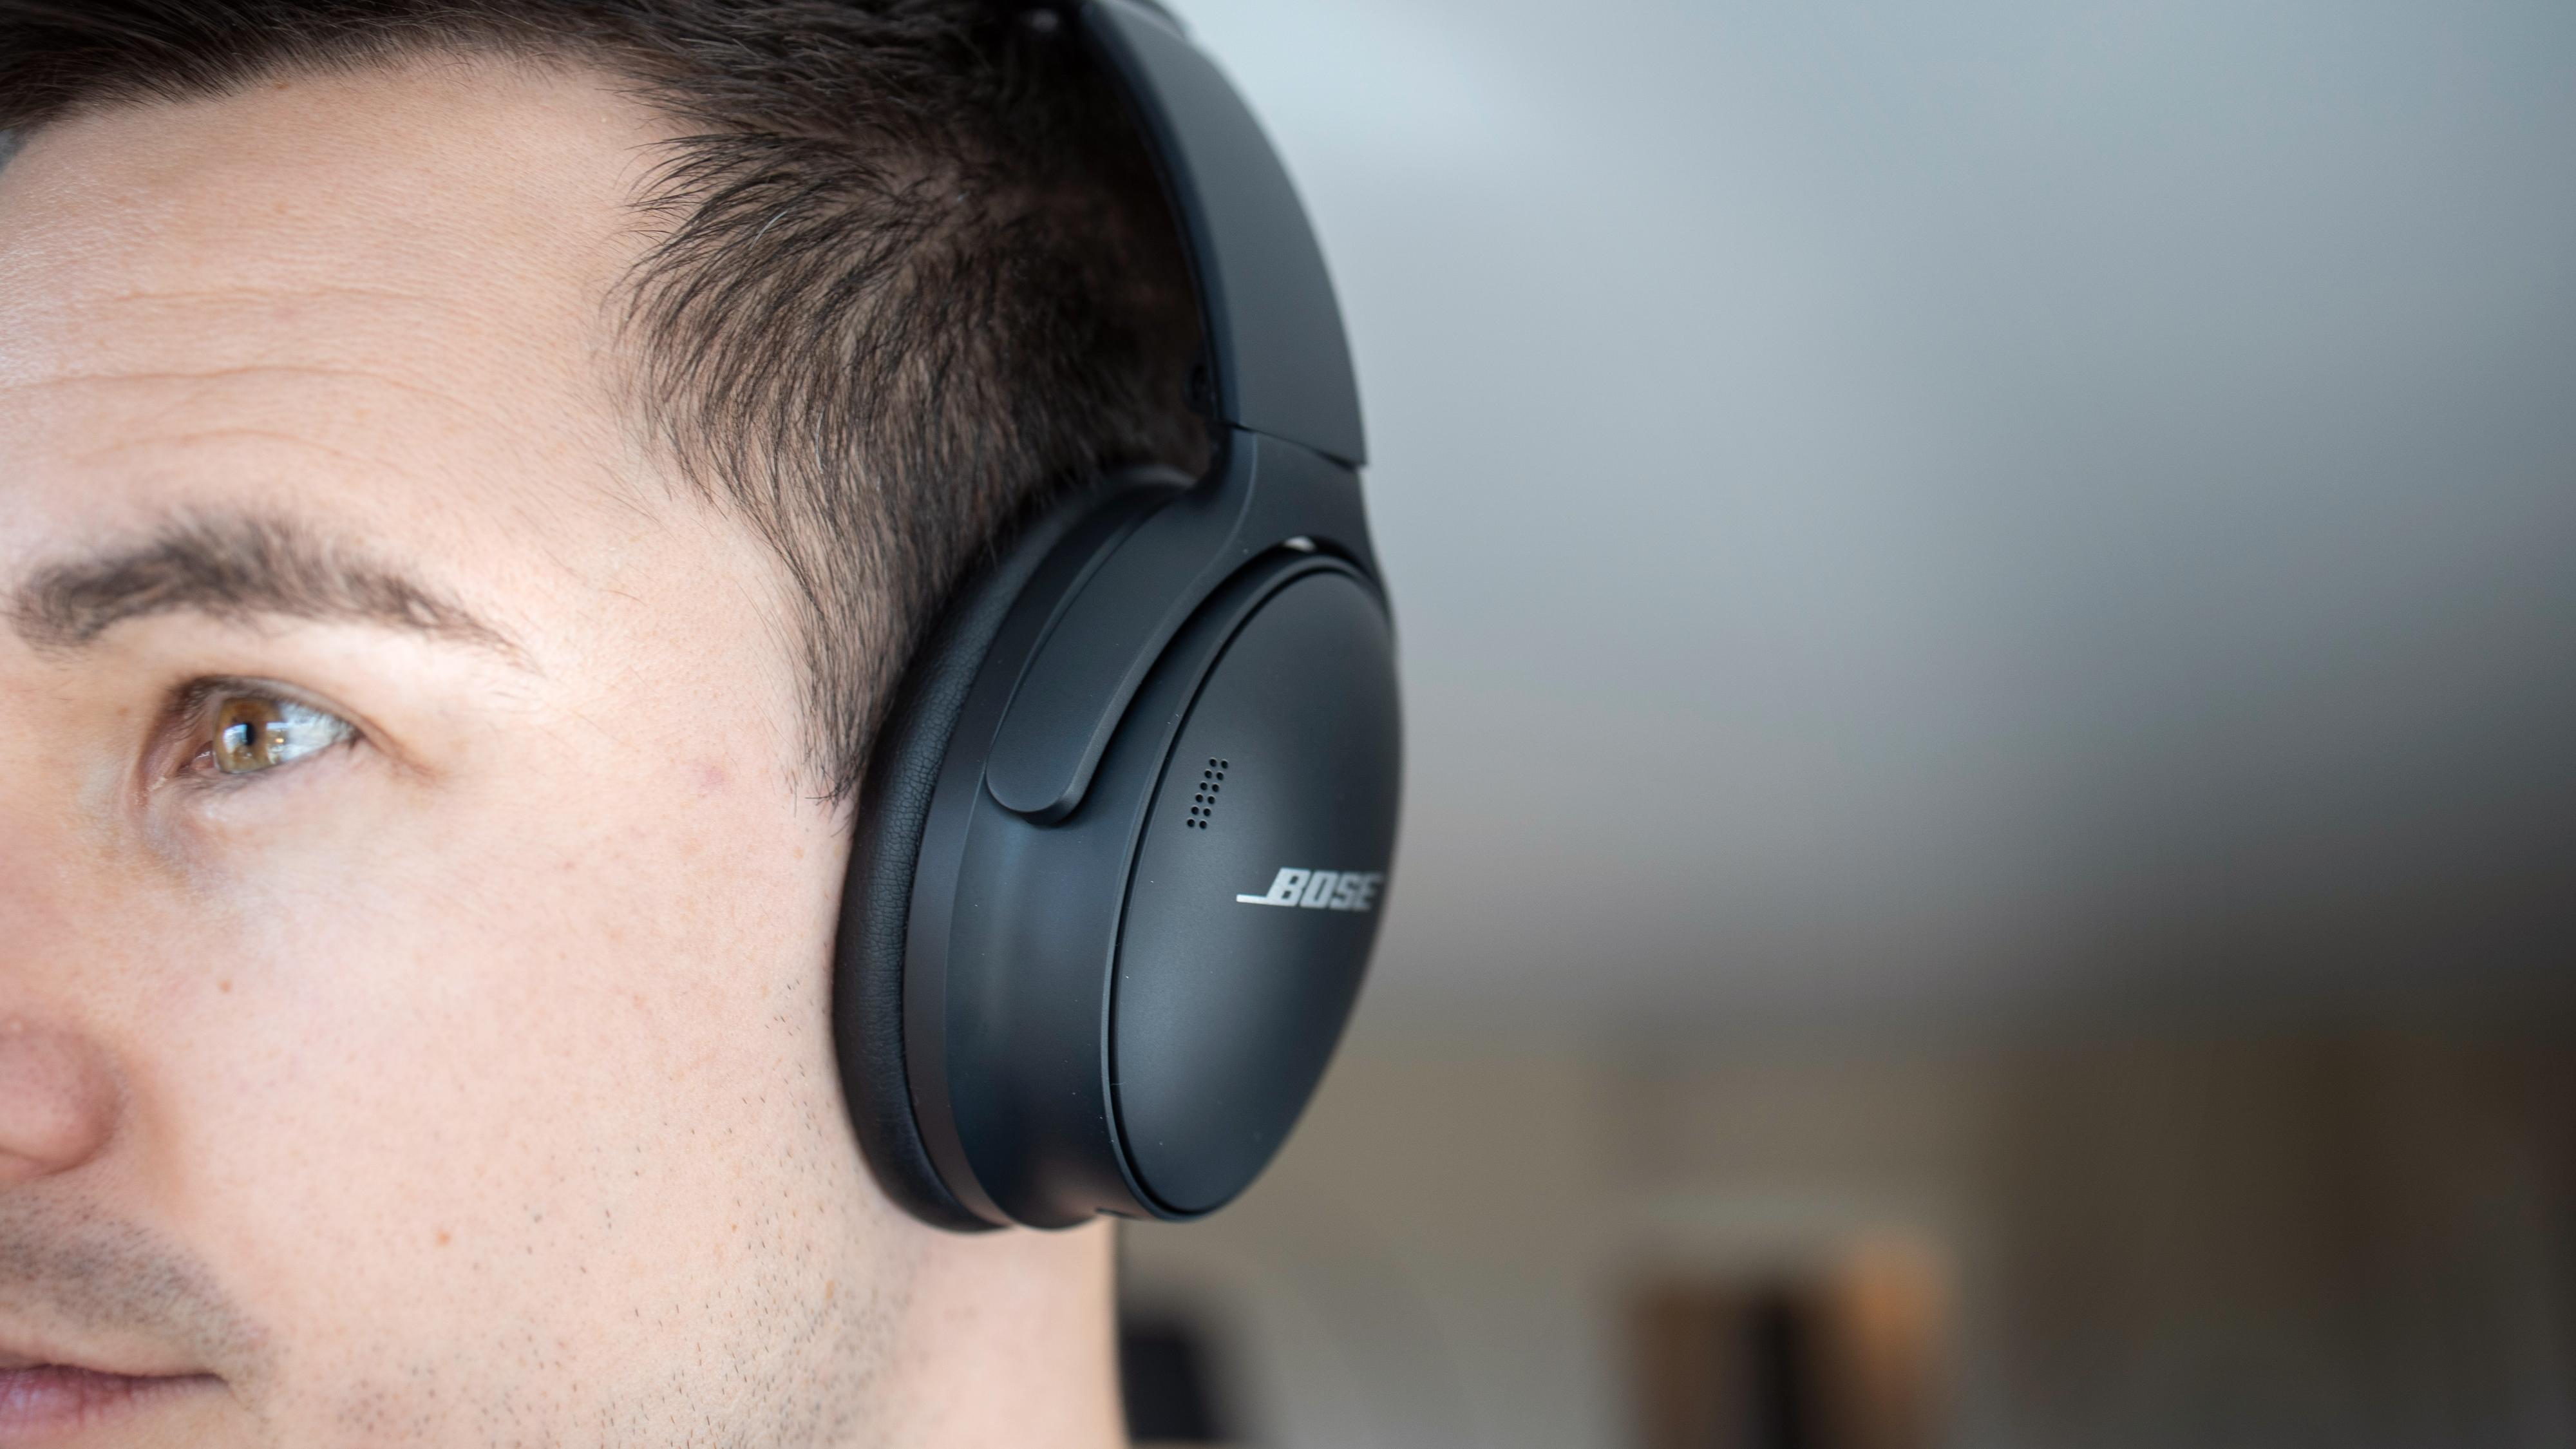 Here is the Bose QC45 noise canceling.